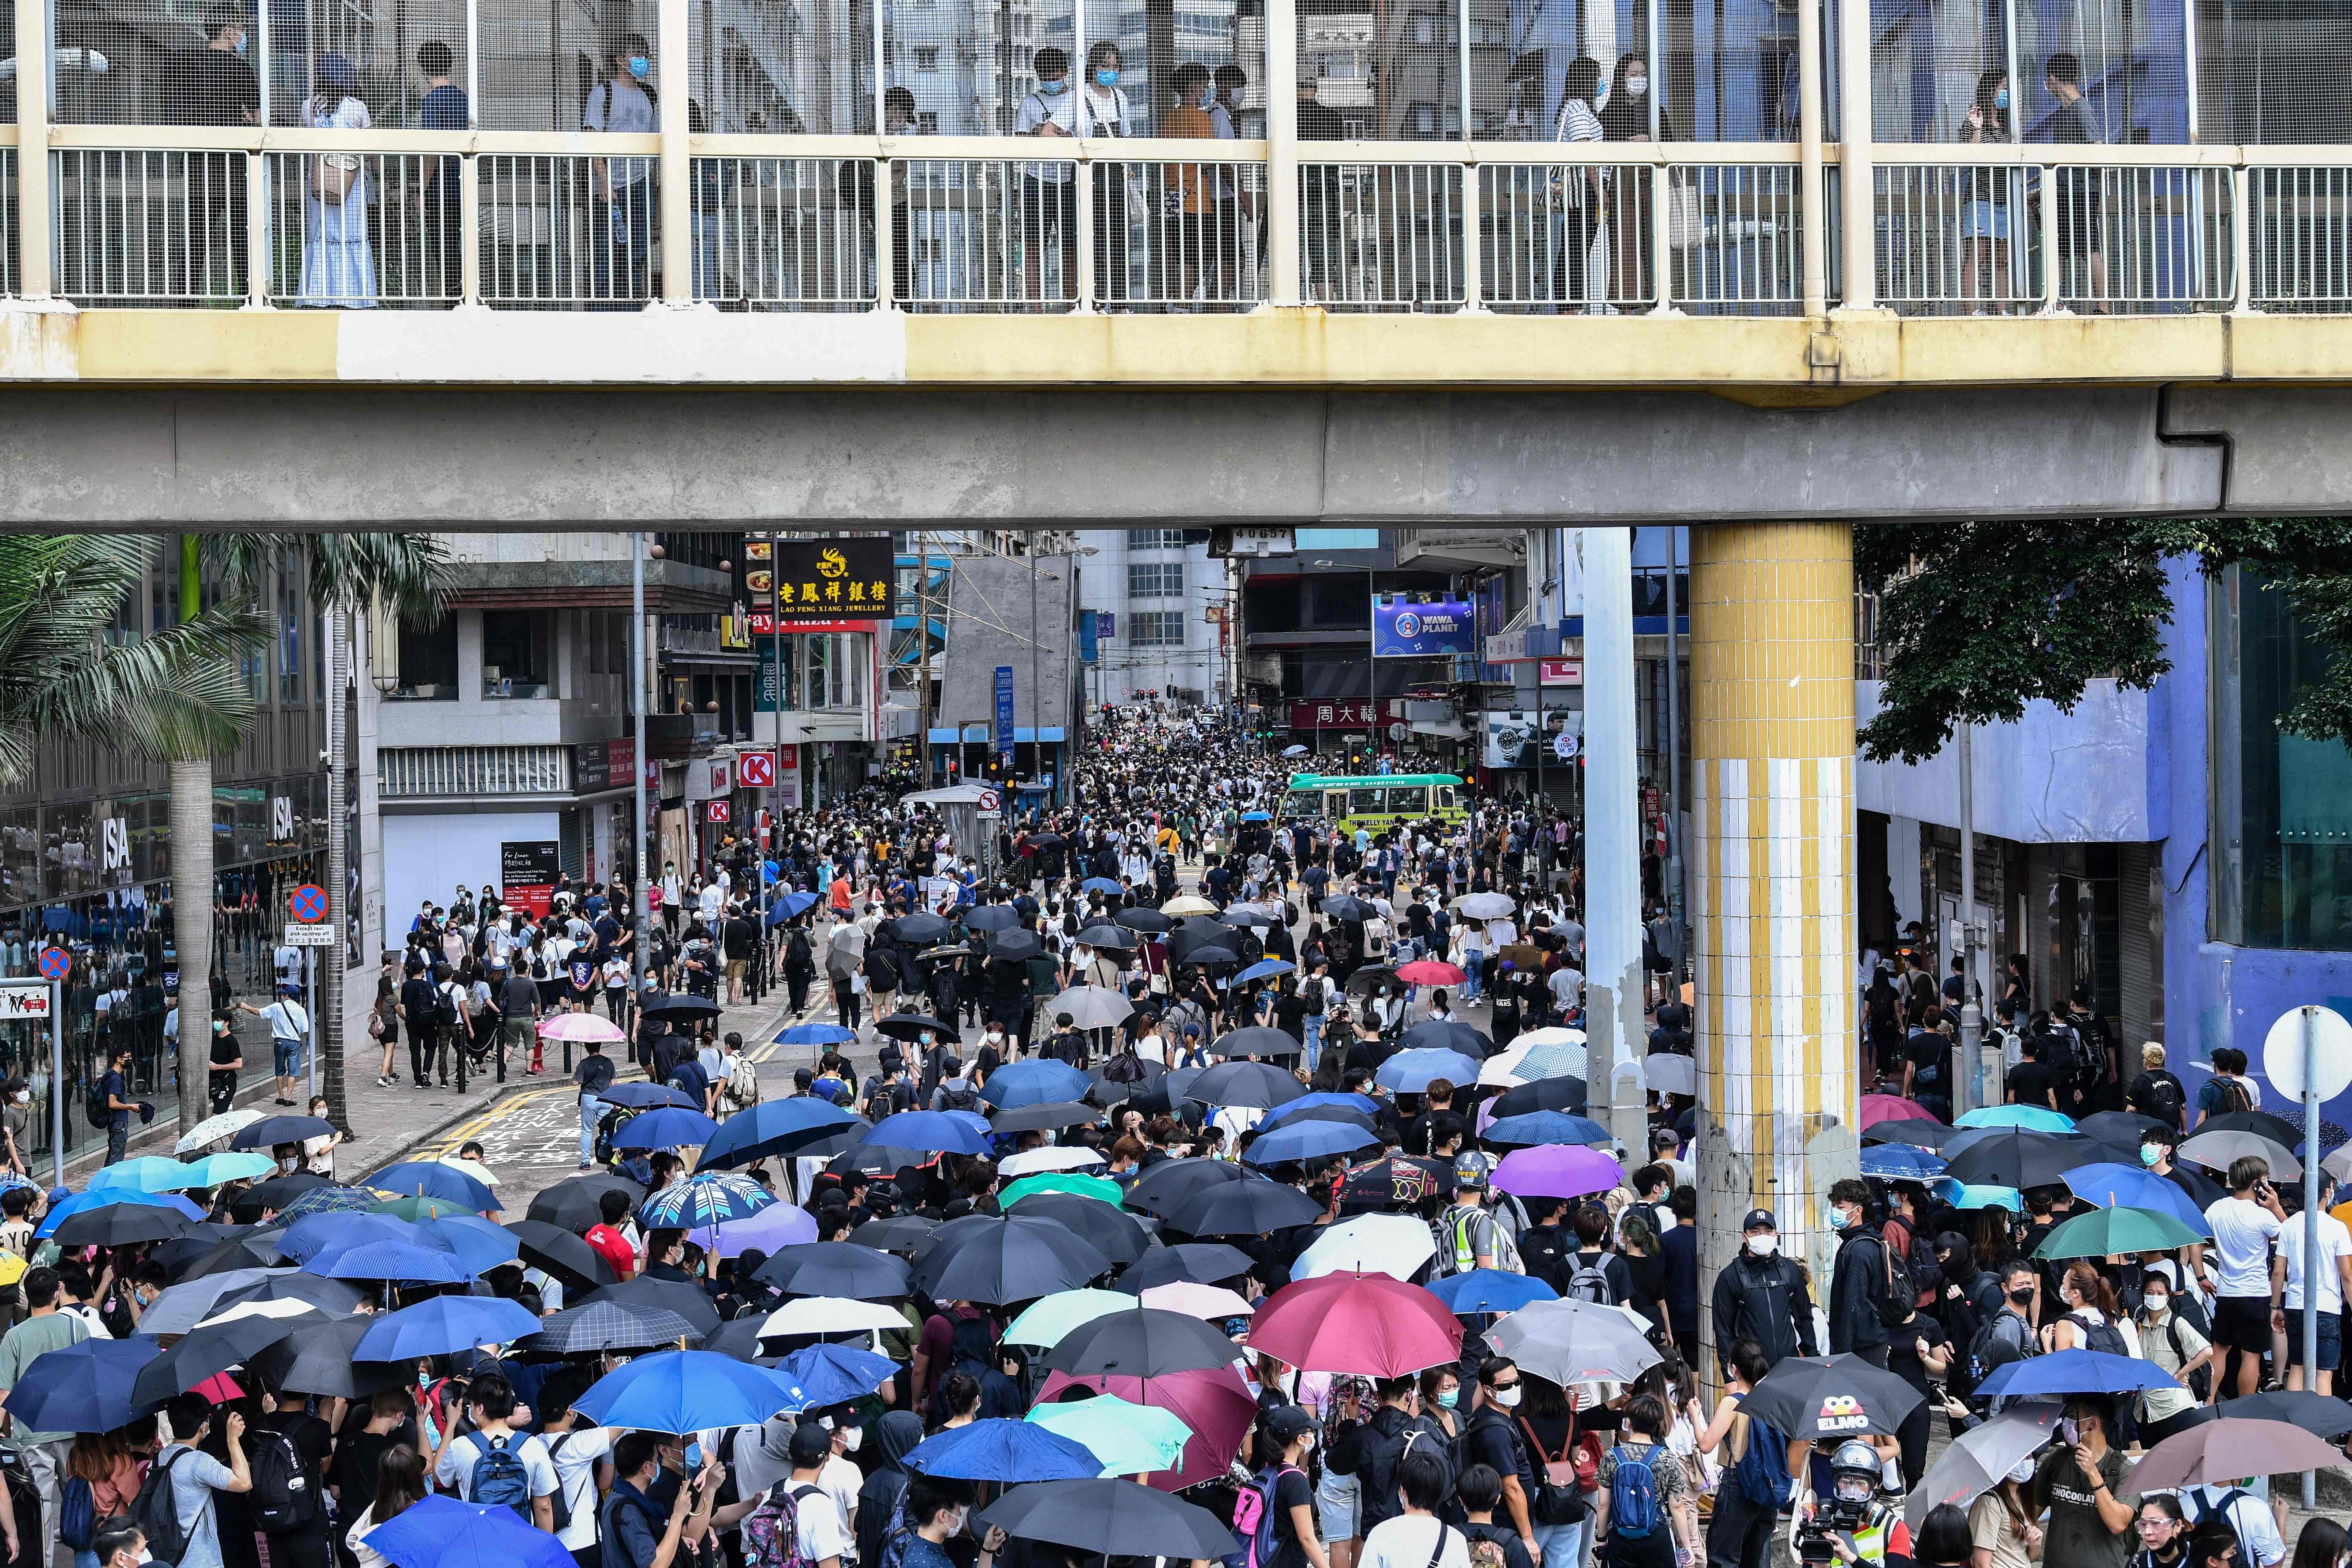 Protesters march on a road during a pro-democracy rally against a proposed new security law in Hong Kong. (AFP photo)